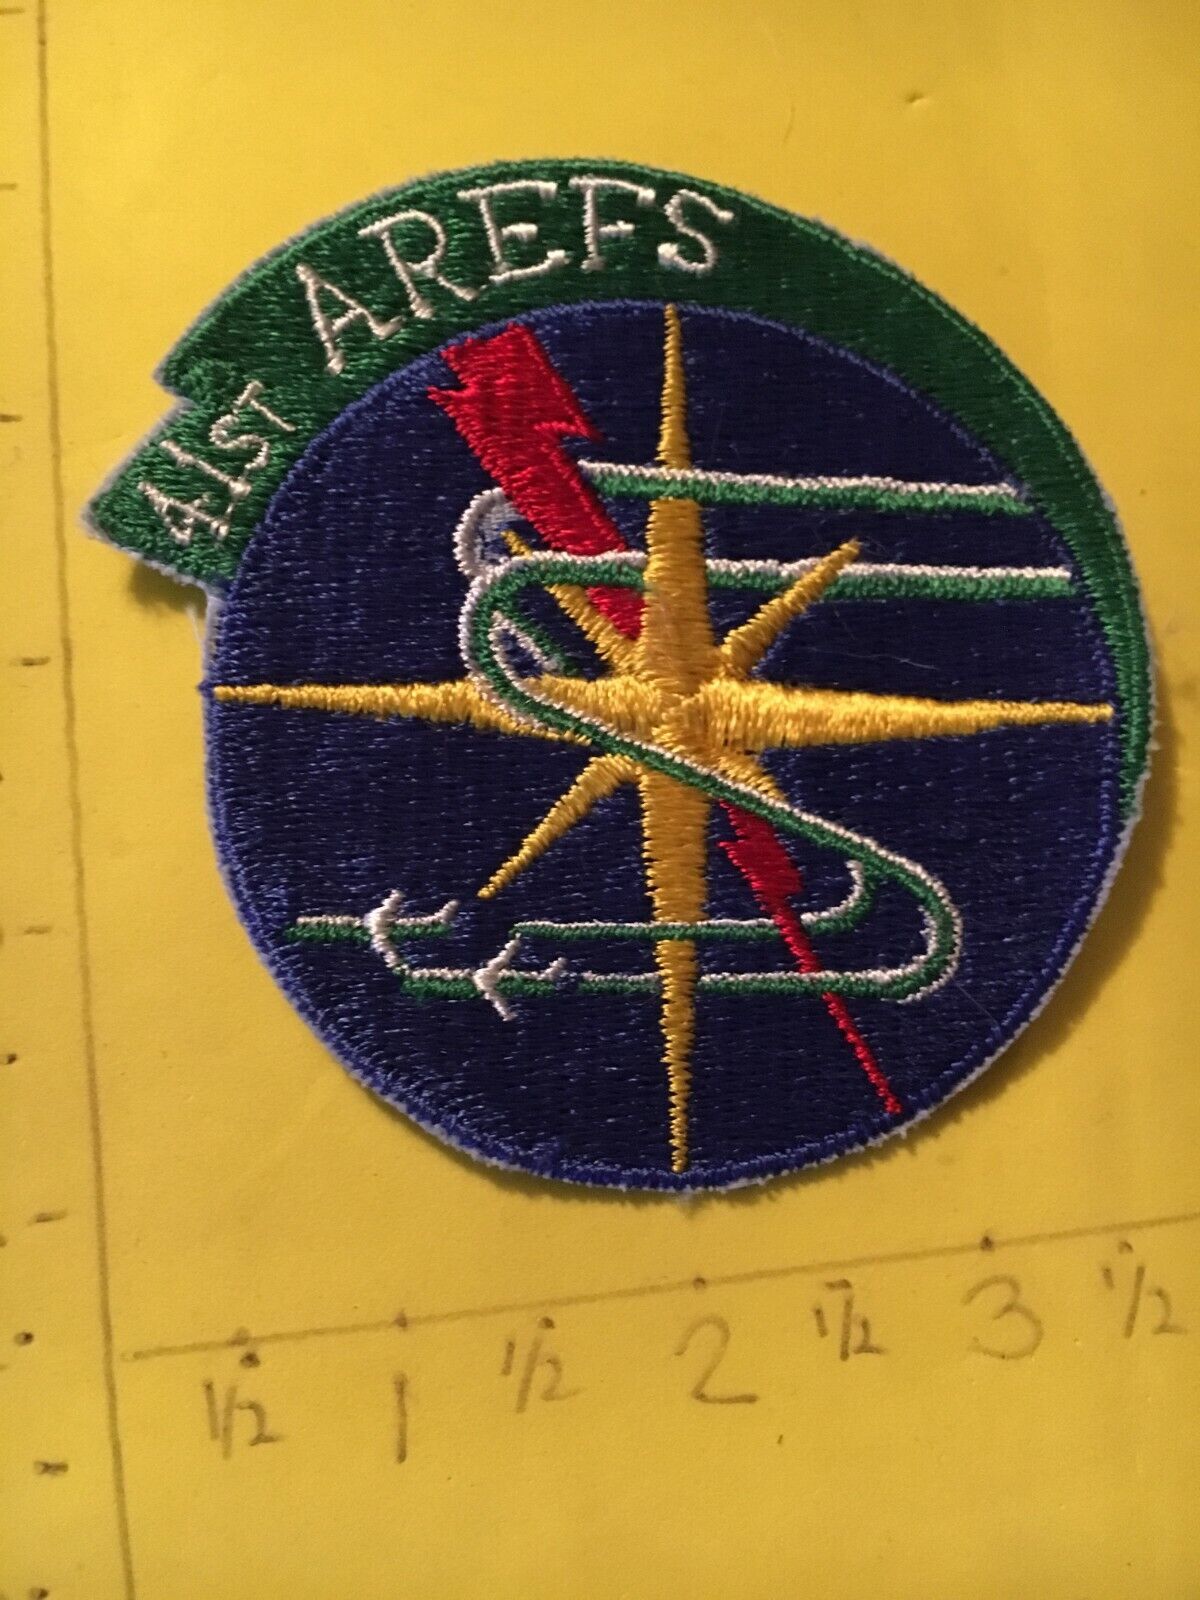 USAF 41st Air Refueling SQUADRON Patch 7/1 